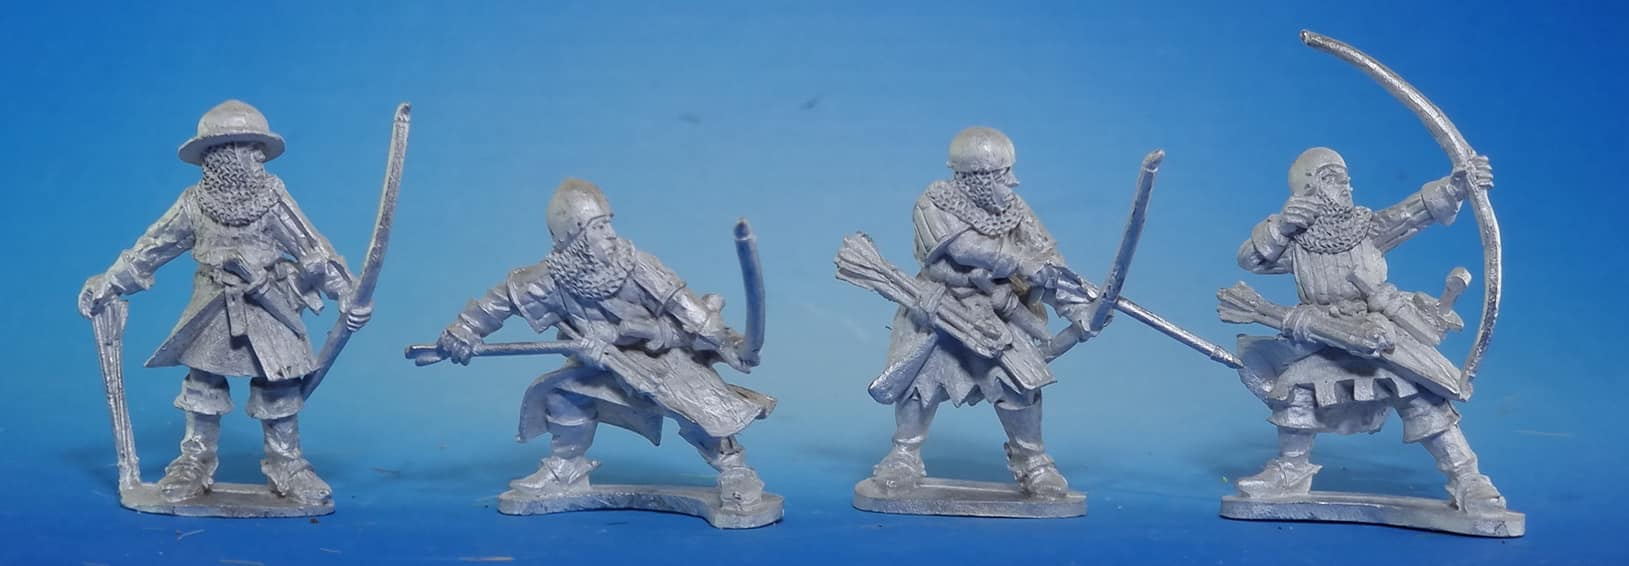 Dismounted Horse Archers - Claymore Castings